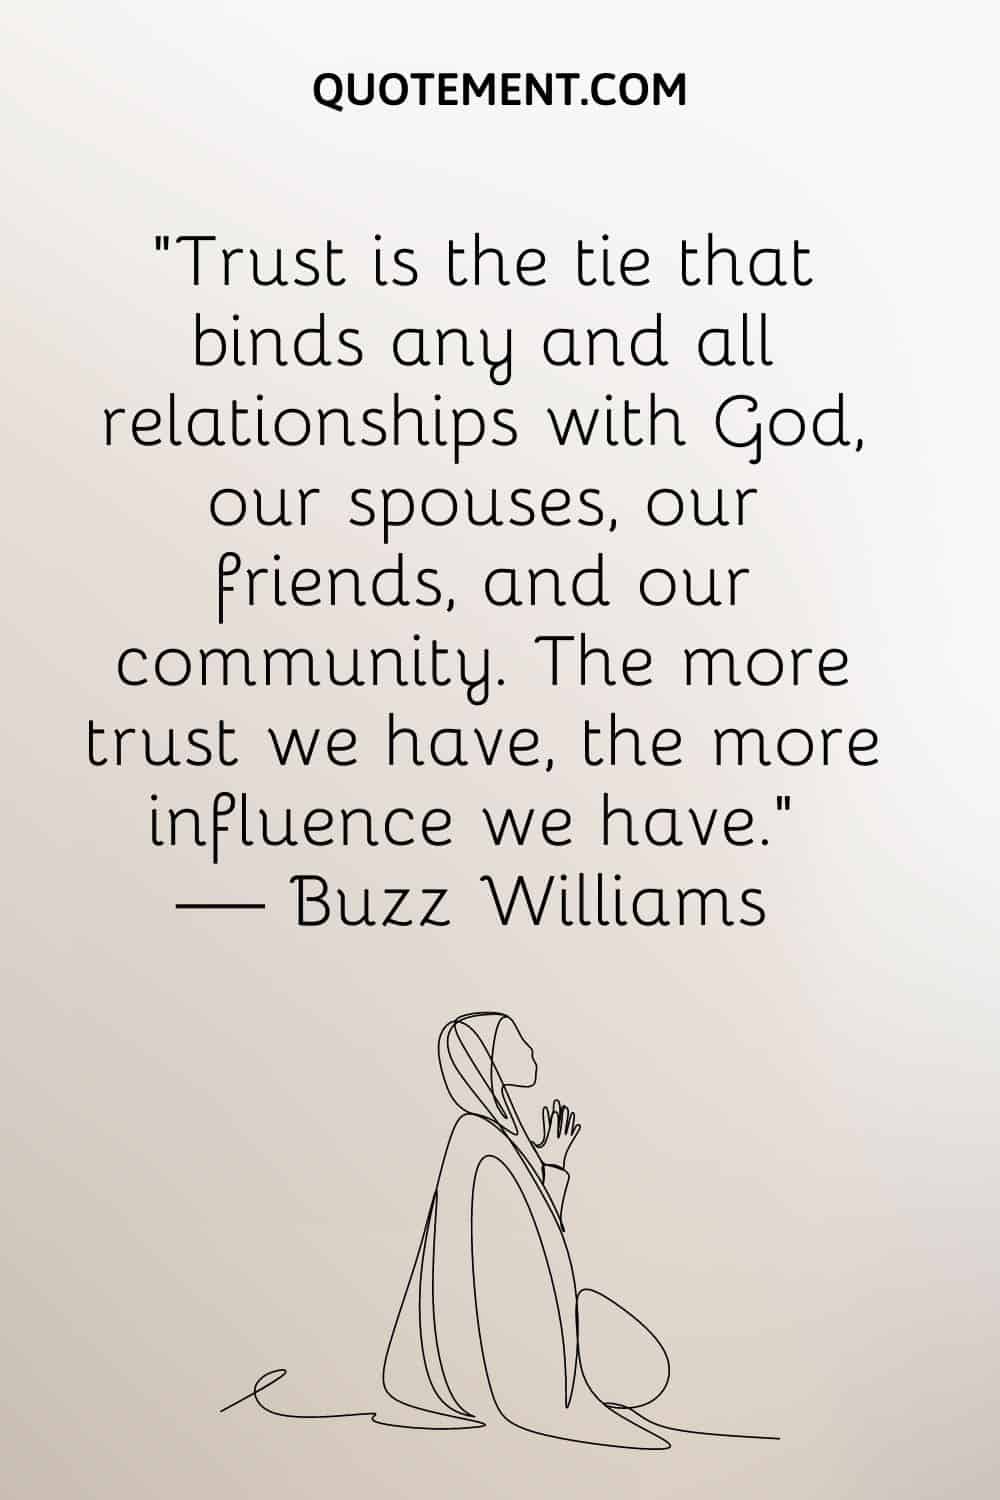 Trust is the tie that binds any and all relationships with God, our spouses, our friends, and our community